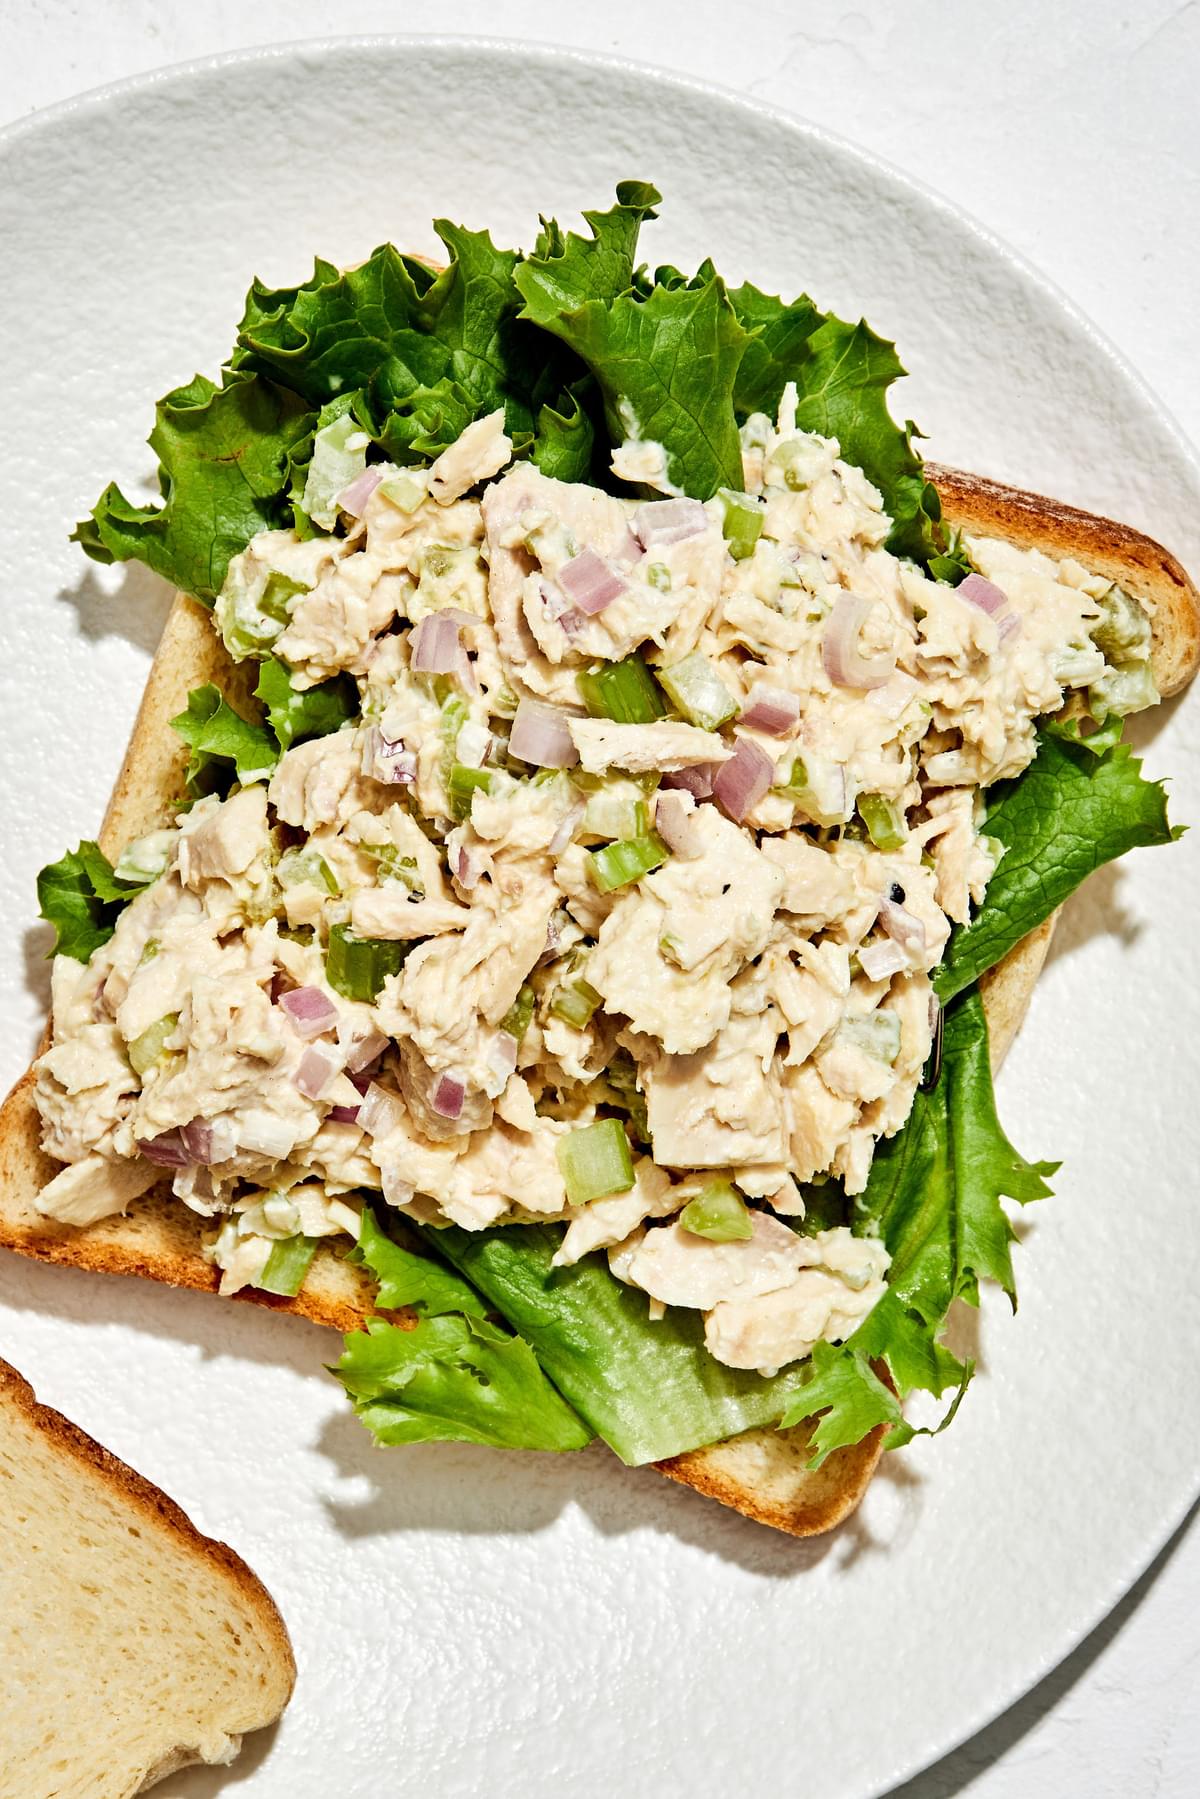 bread on a plate topped with lettuce and homemade tuna salad